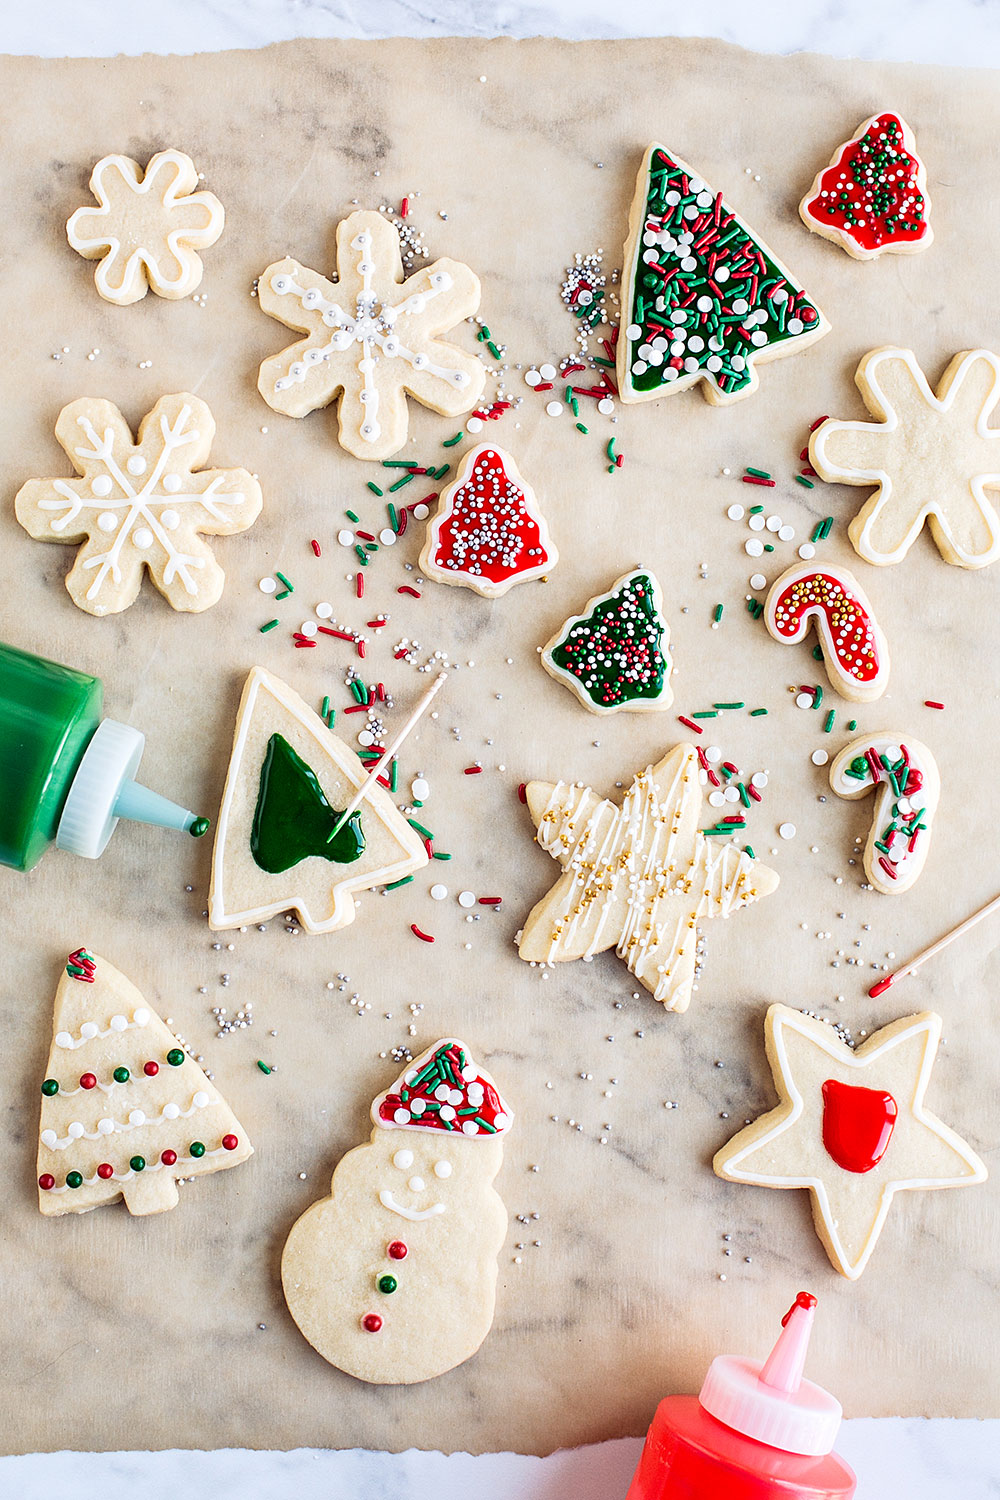 Easy Cut Out Sugar Cookies being decorated with red and green icing and sprinkles.